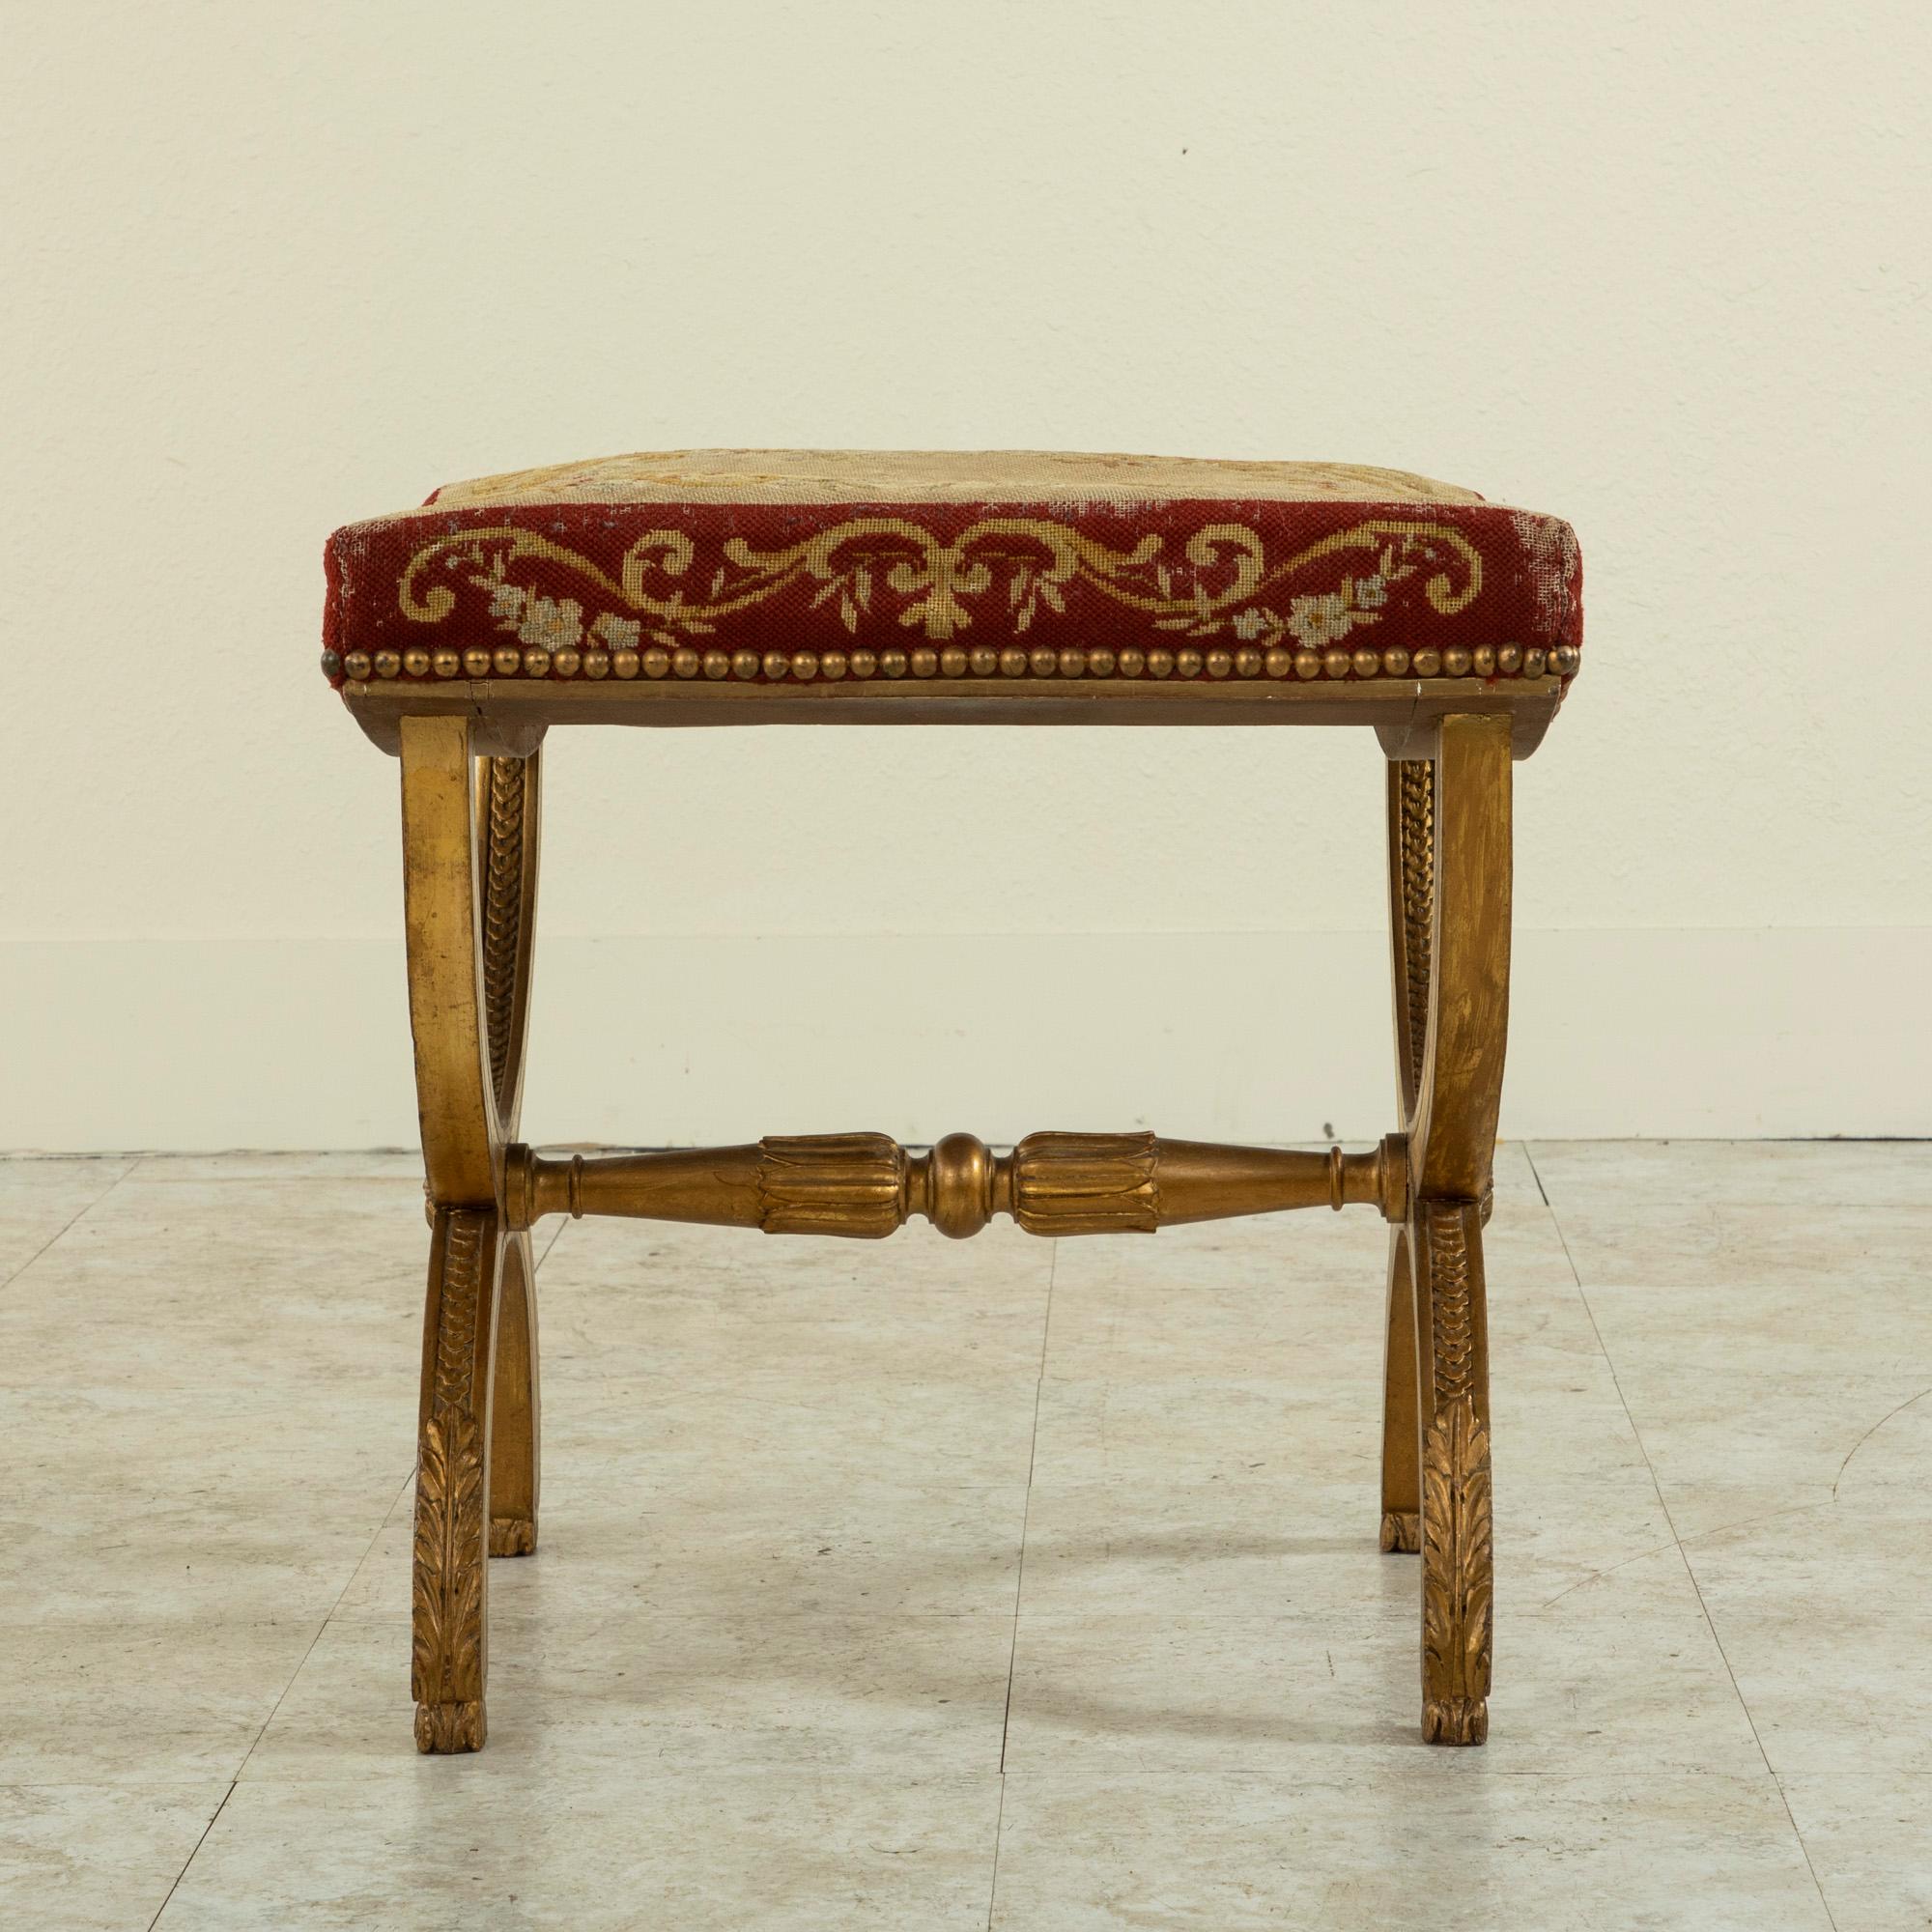 Tapestry 19th Century French Louis XIV Giltwood Bench, Vanity Stool with Needlepoint Seat